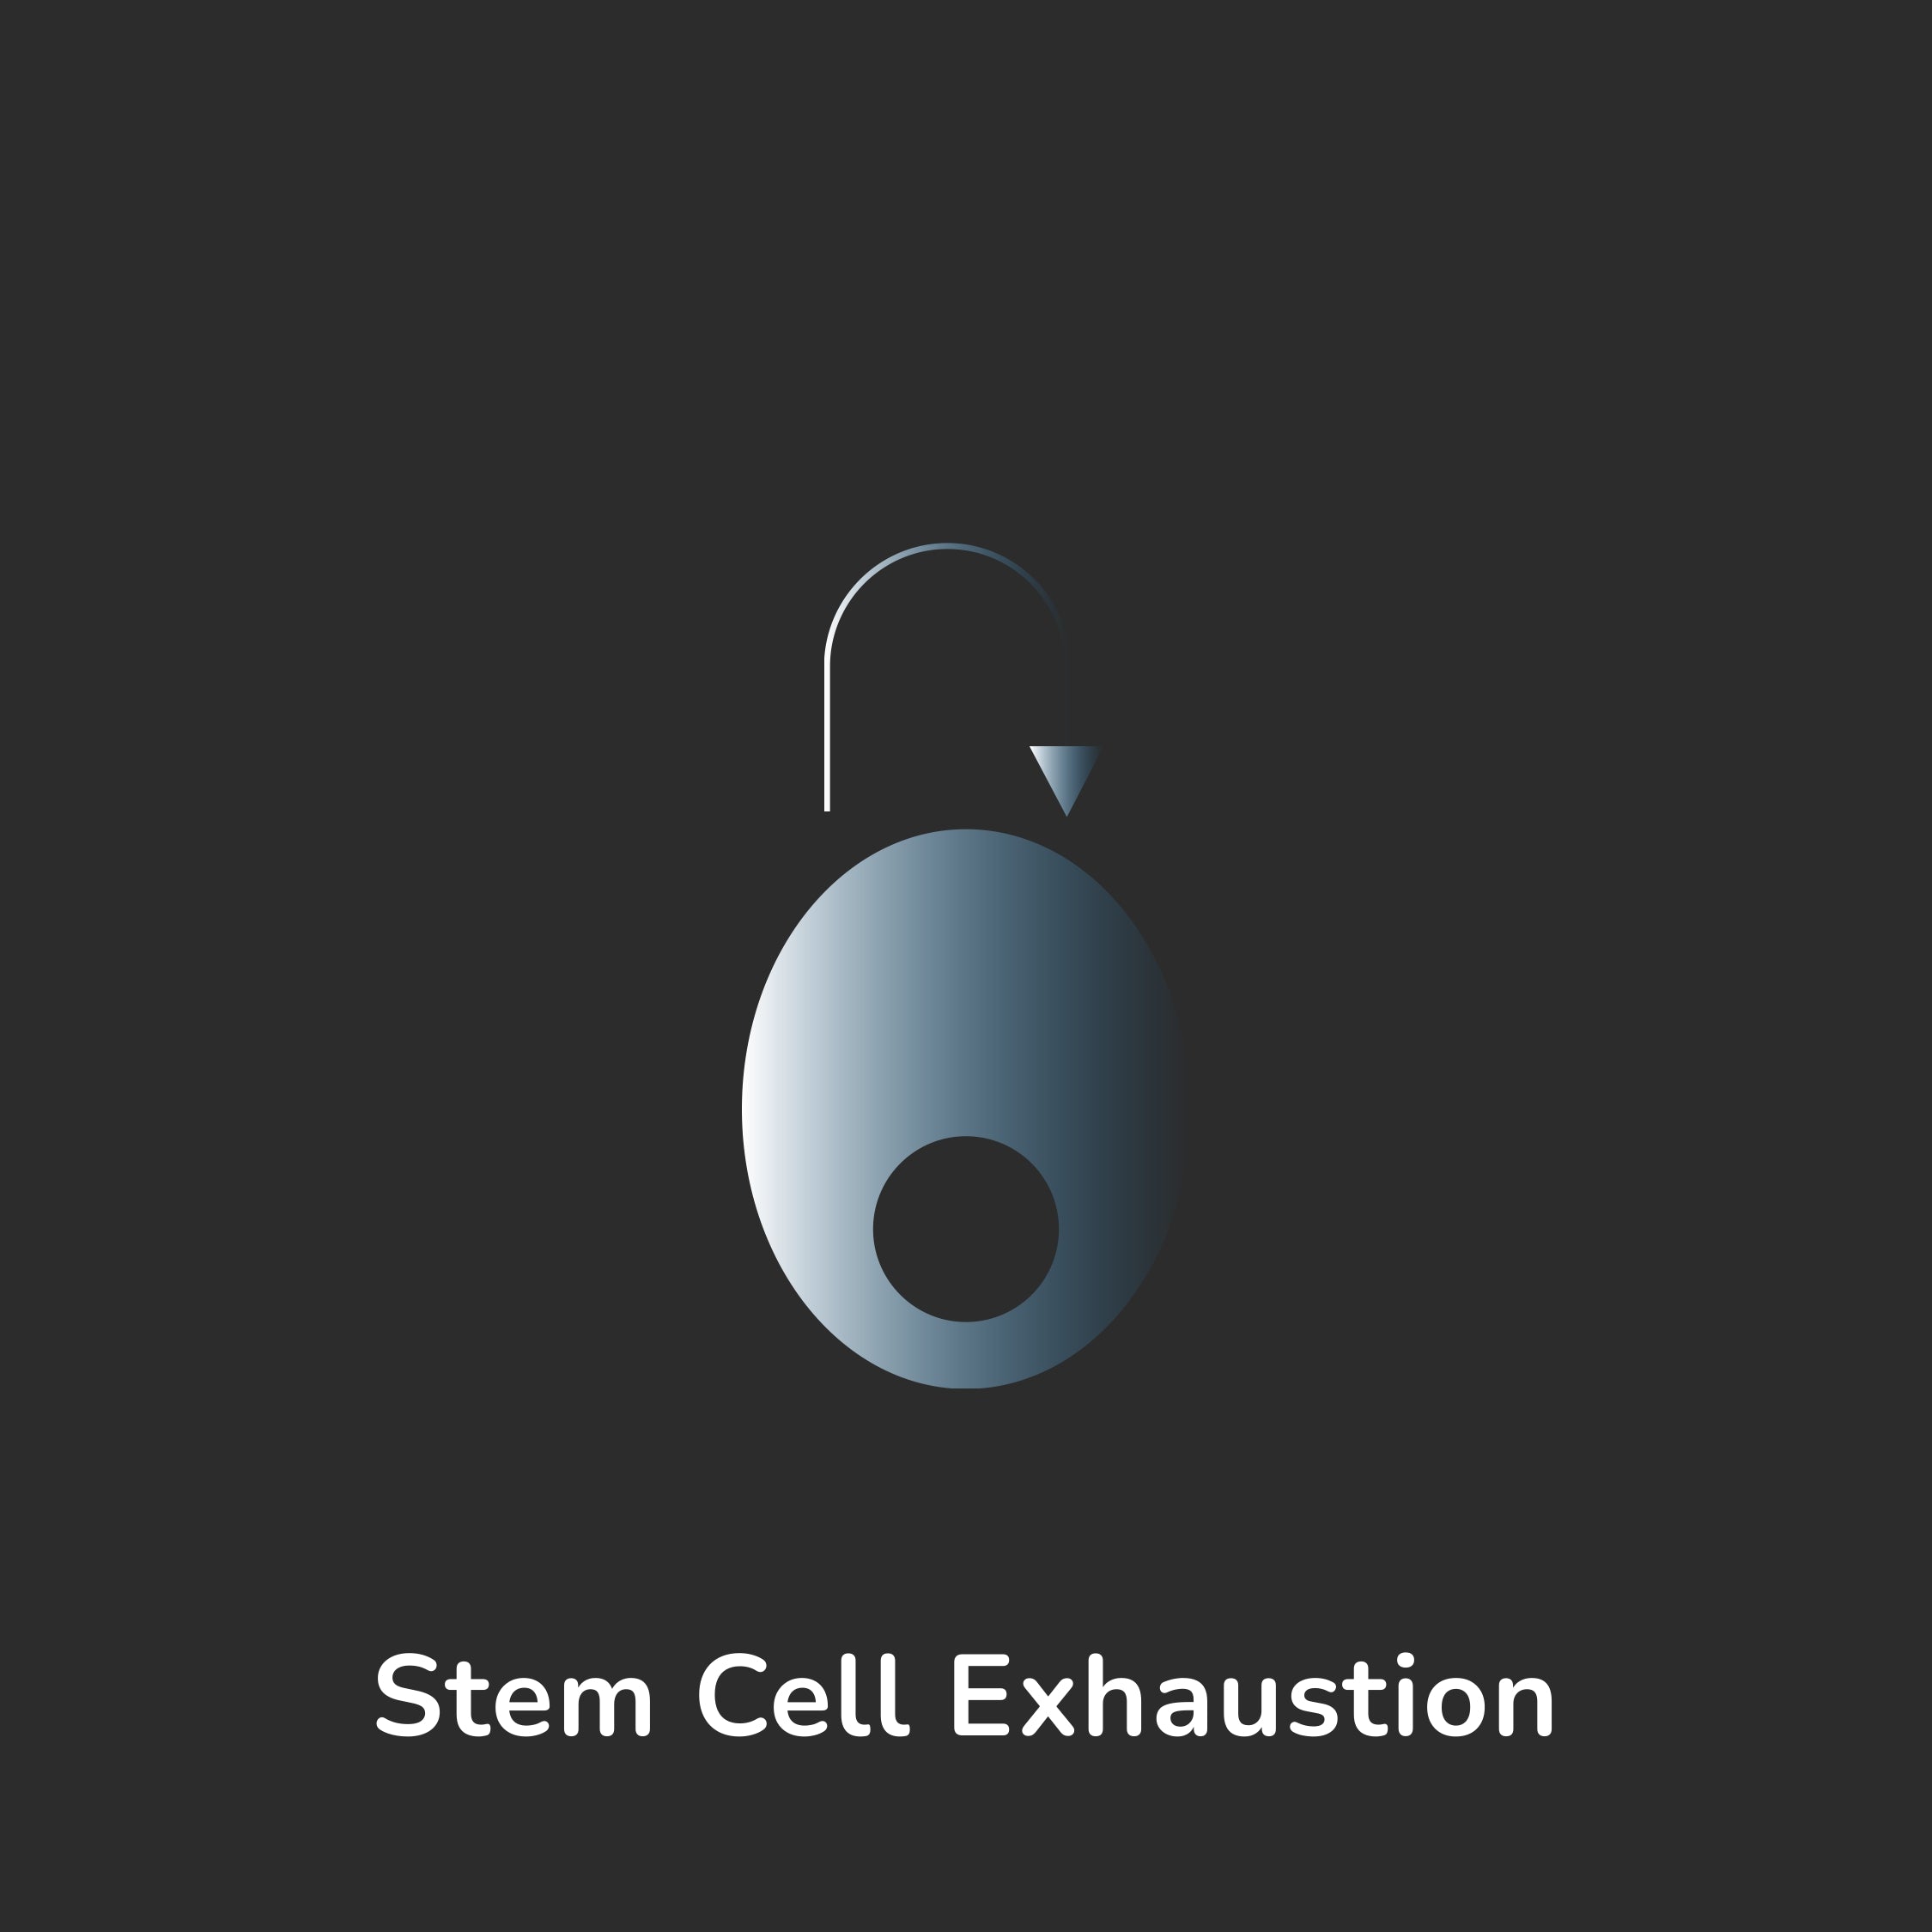 Aging Hallmark - Stem Cell Exhaustion